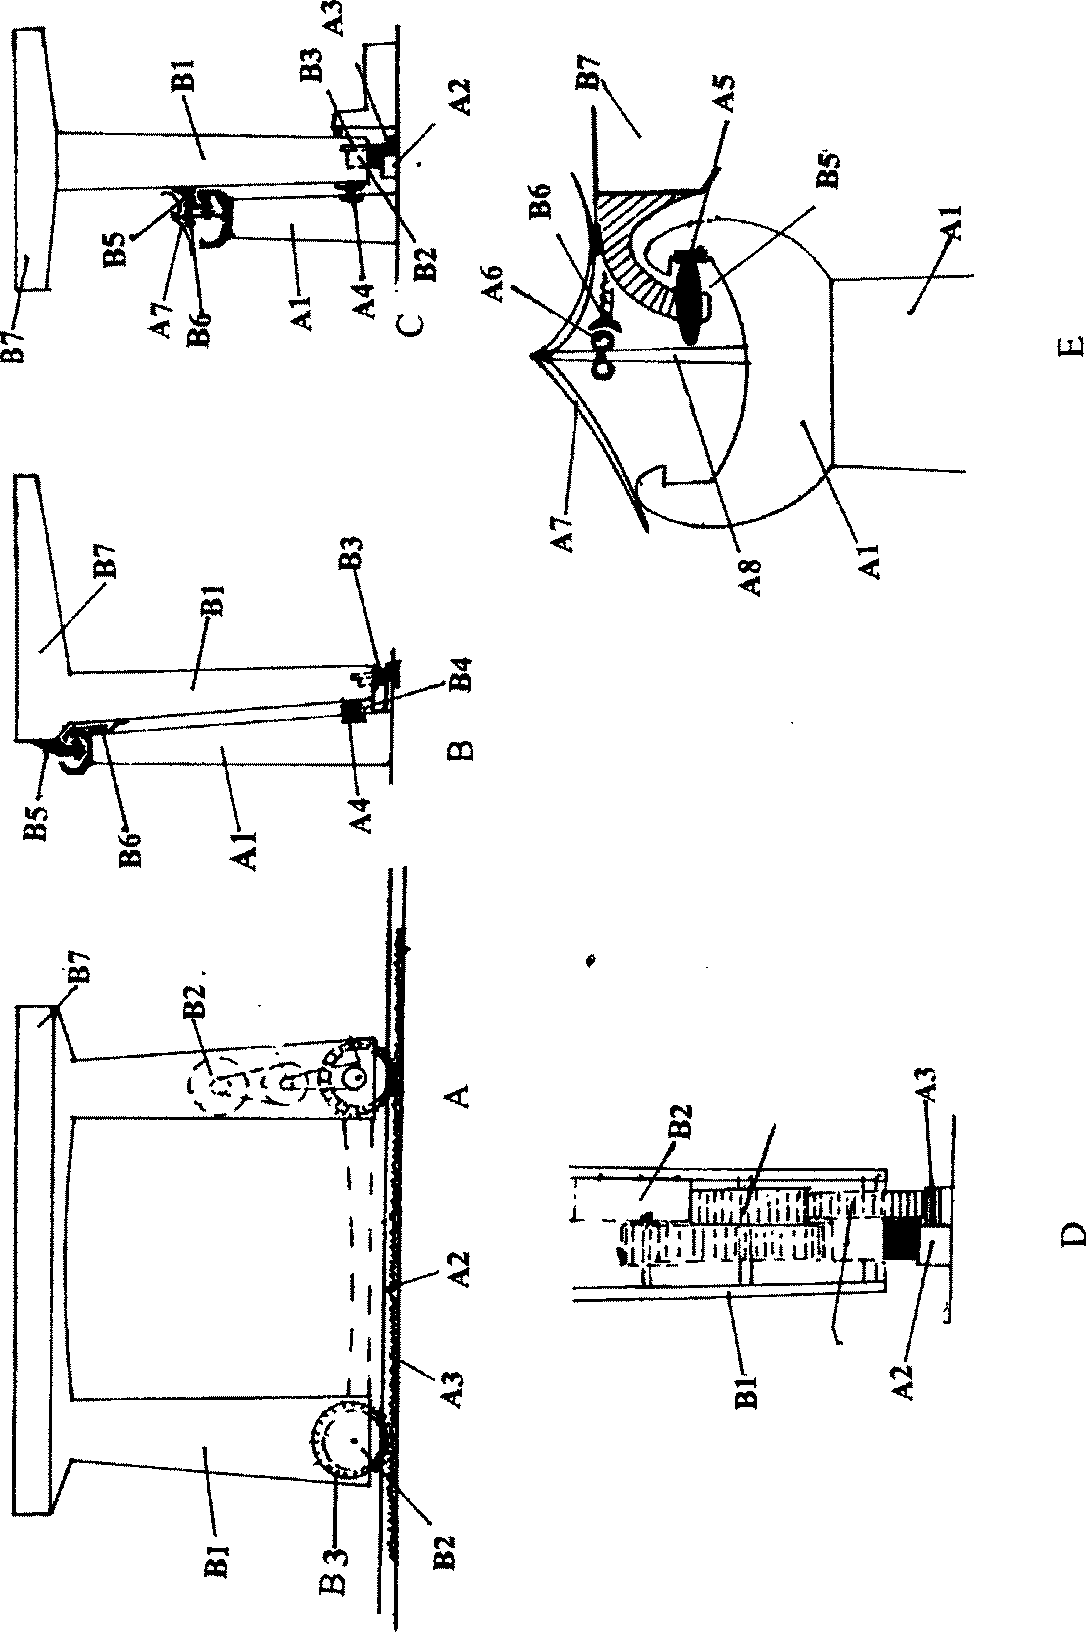 Multifunctional composite rapid railway transport vehicle and system for carrying vehicles